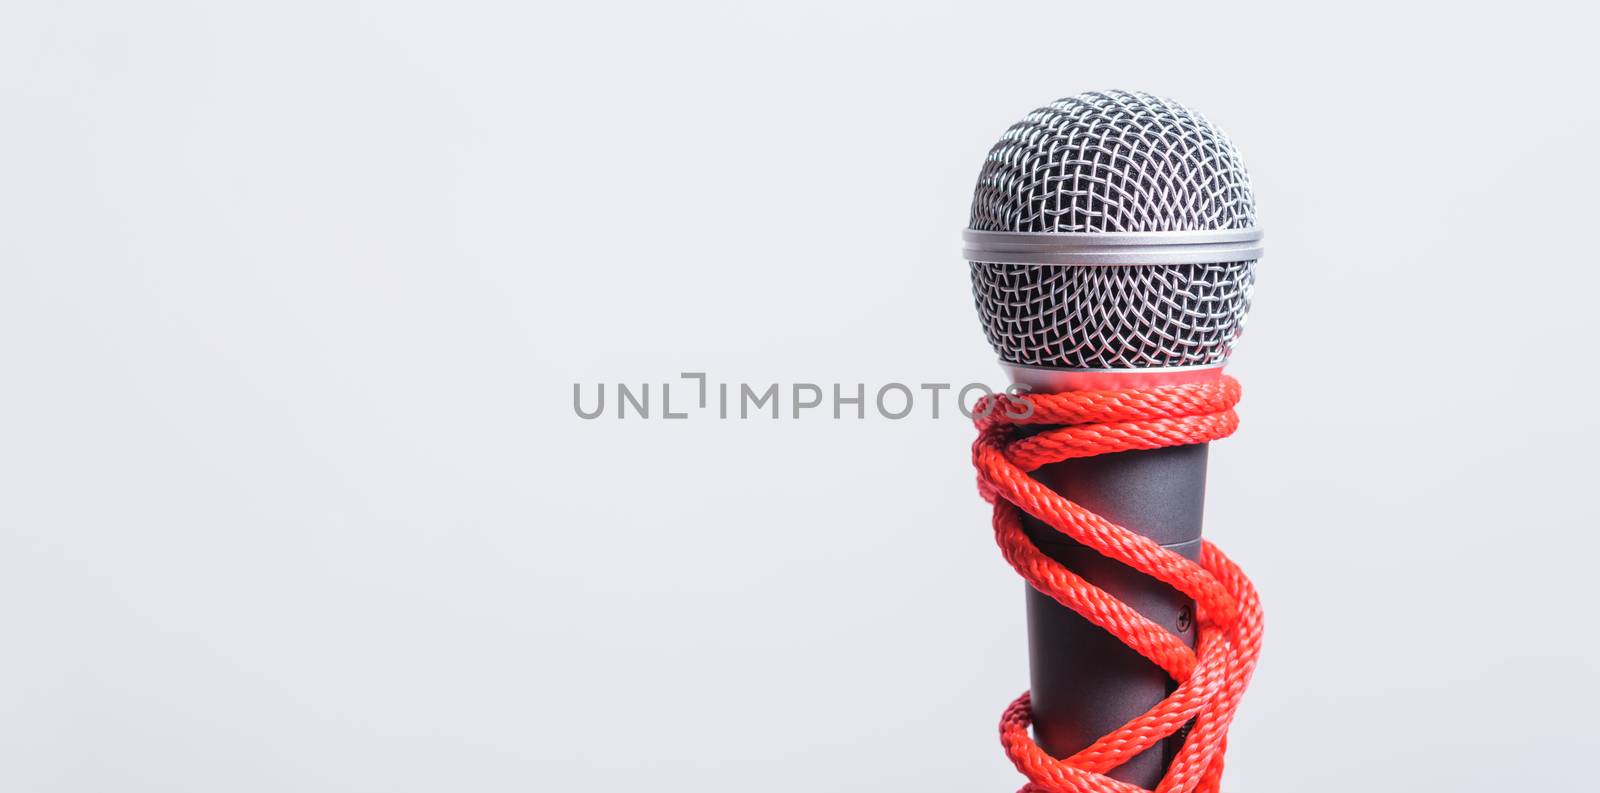 Rope on microphone with copy space on white background by Sorapop